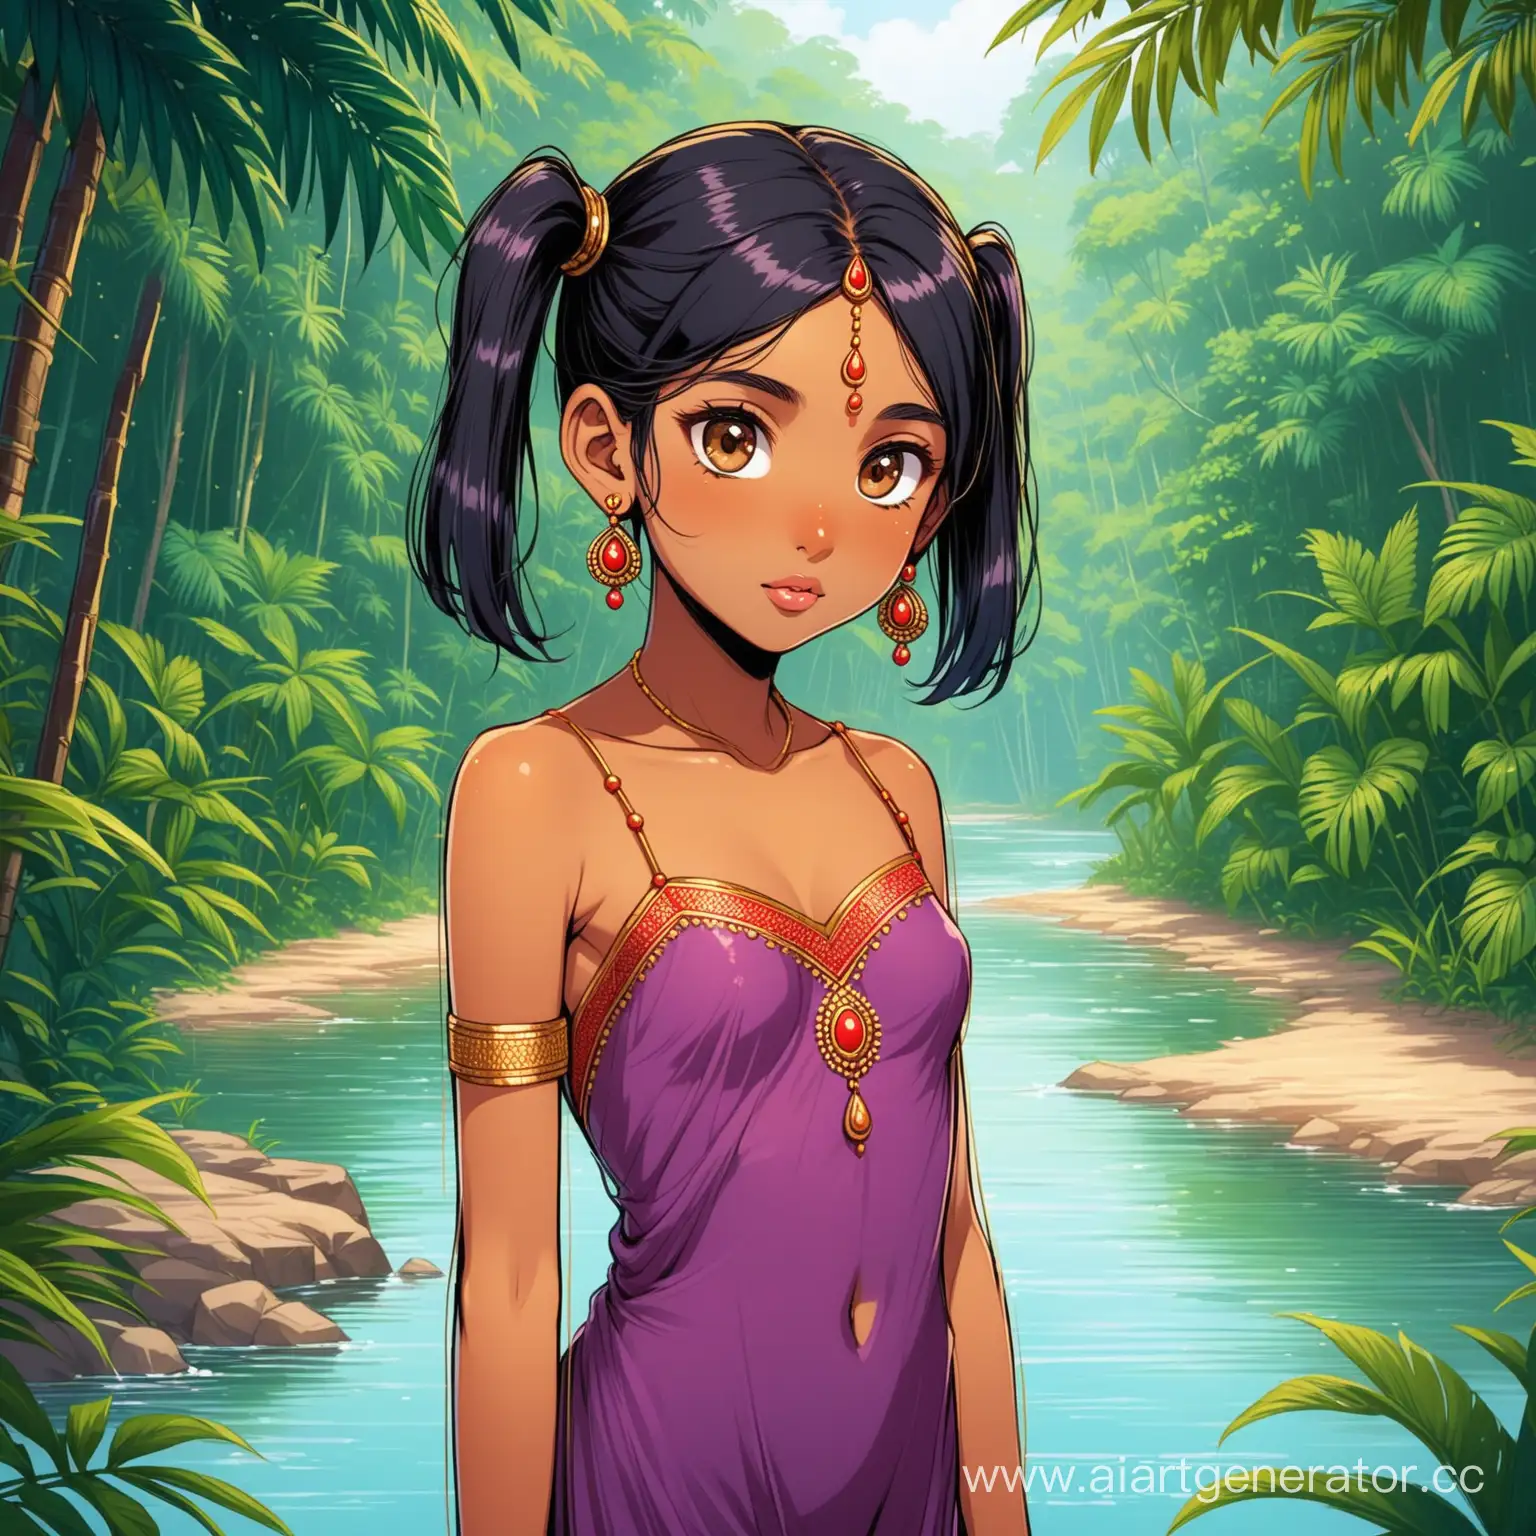 Indian-Jungle-Scene-Tanned-Hindu-Girl-with-Pigtails-by-the-River